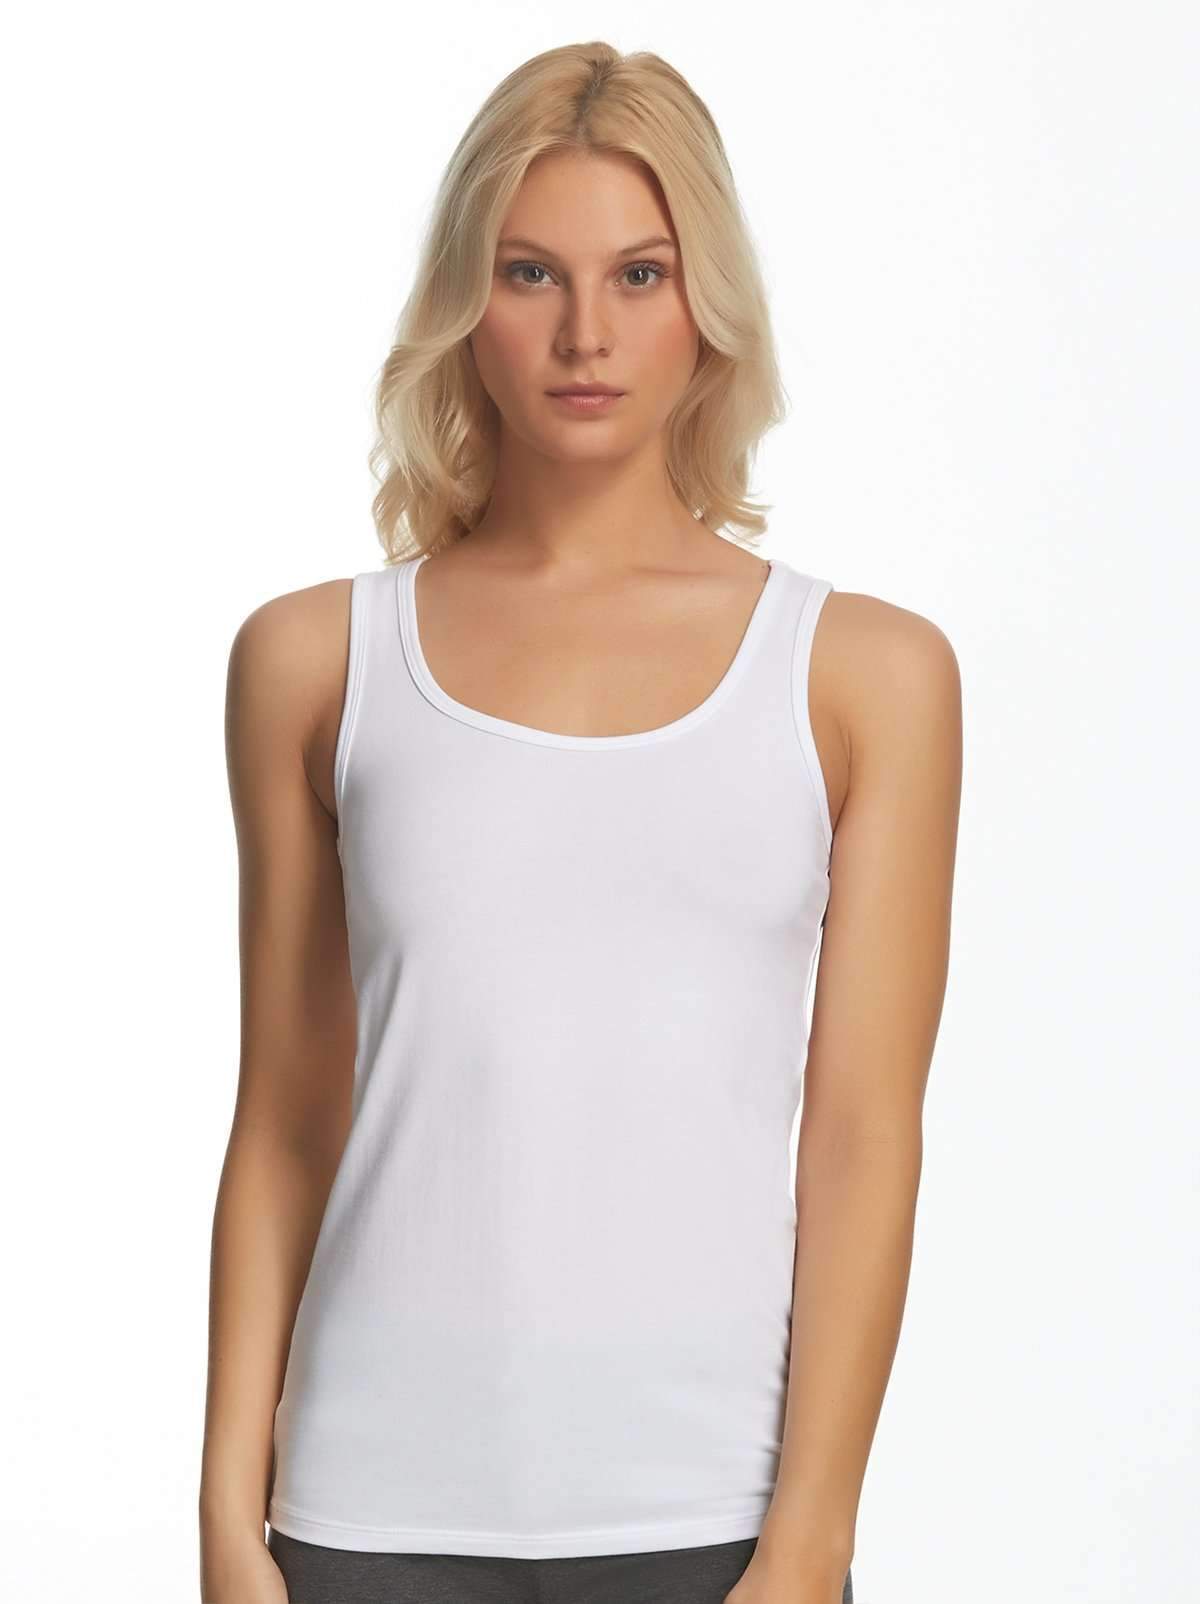 Women's Tank Top Cotton Ribbed 2 Pack Deal(H Grey/H Grey-L)